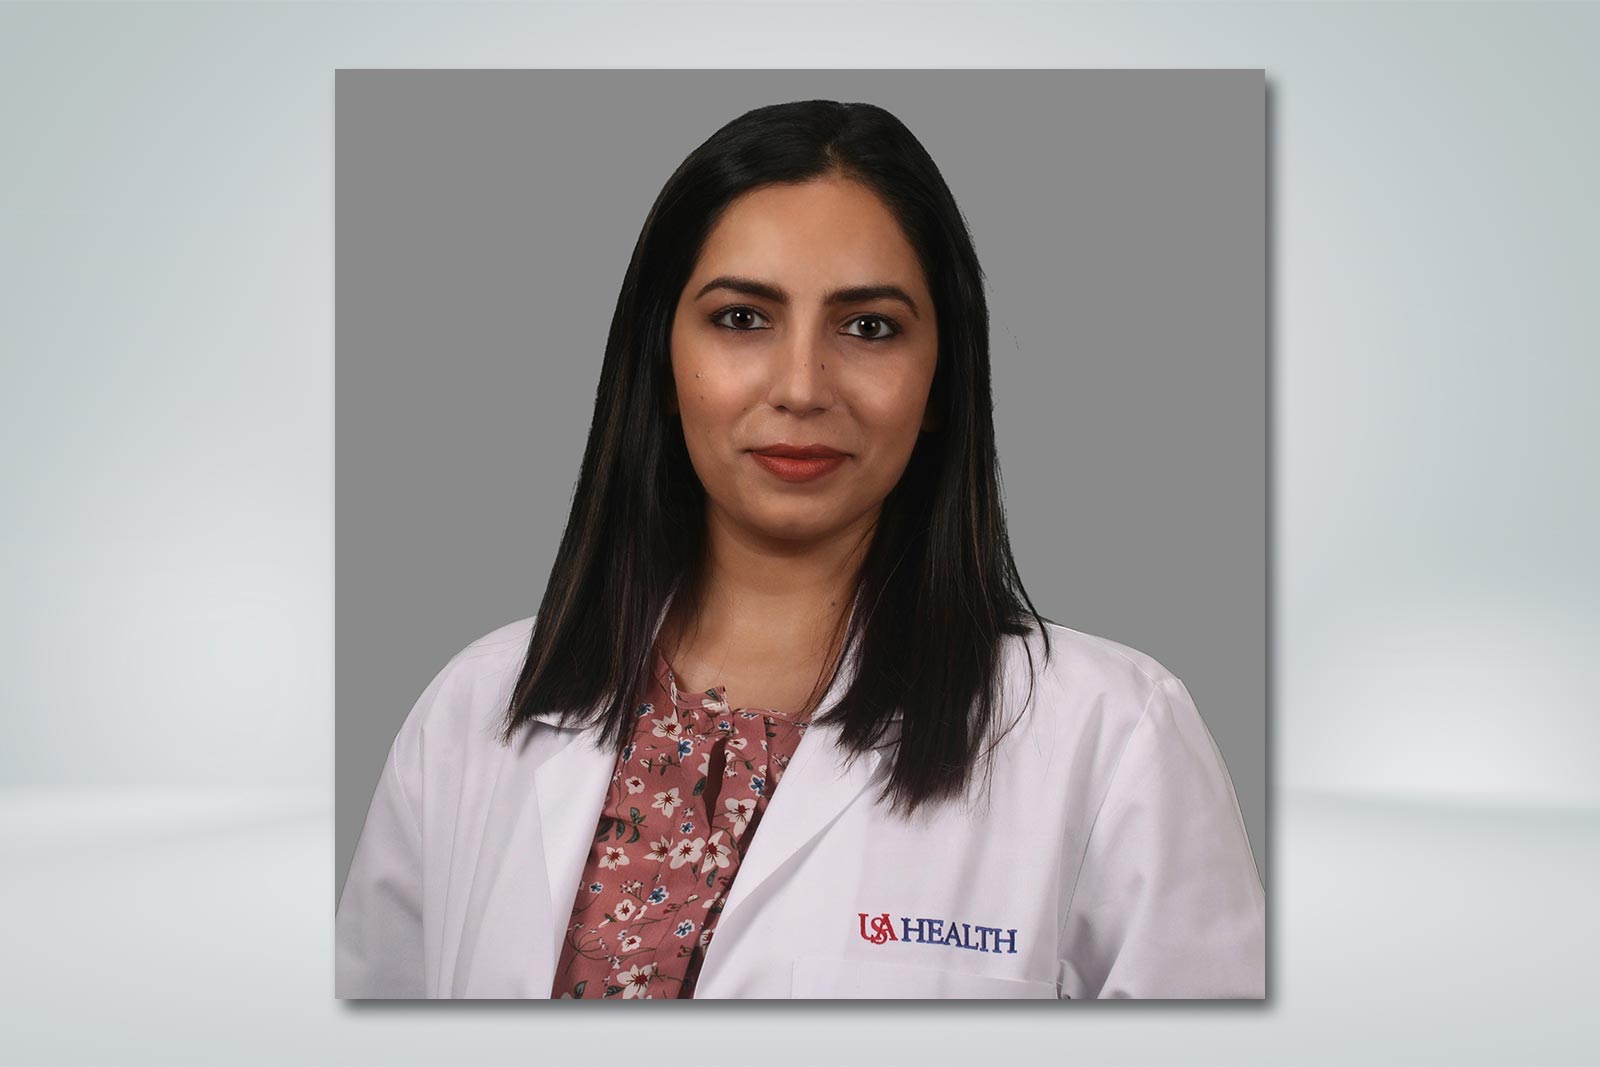 USA Health Mithcell Cancer Institute Adds Munir